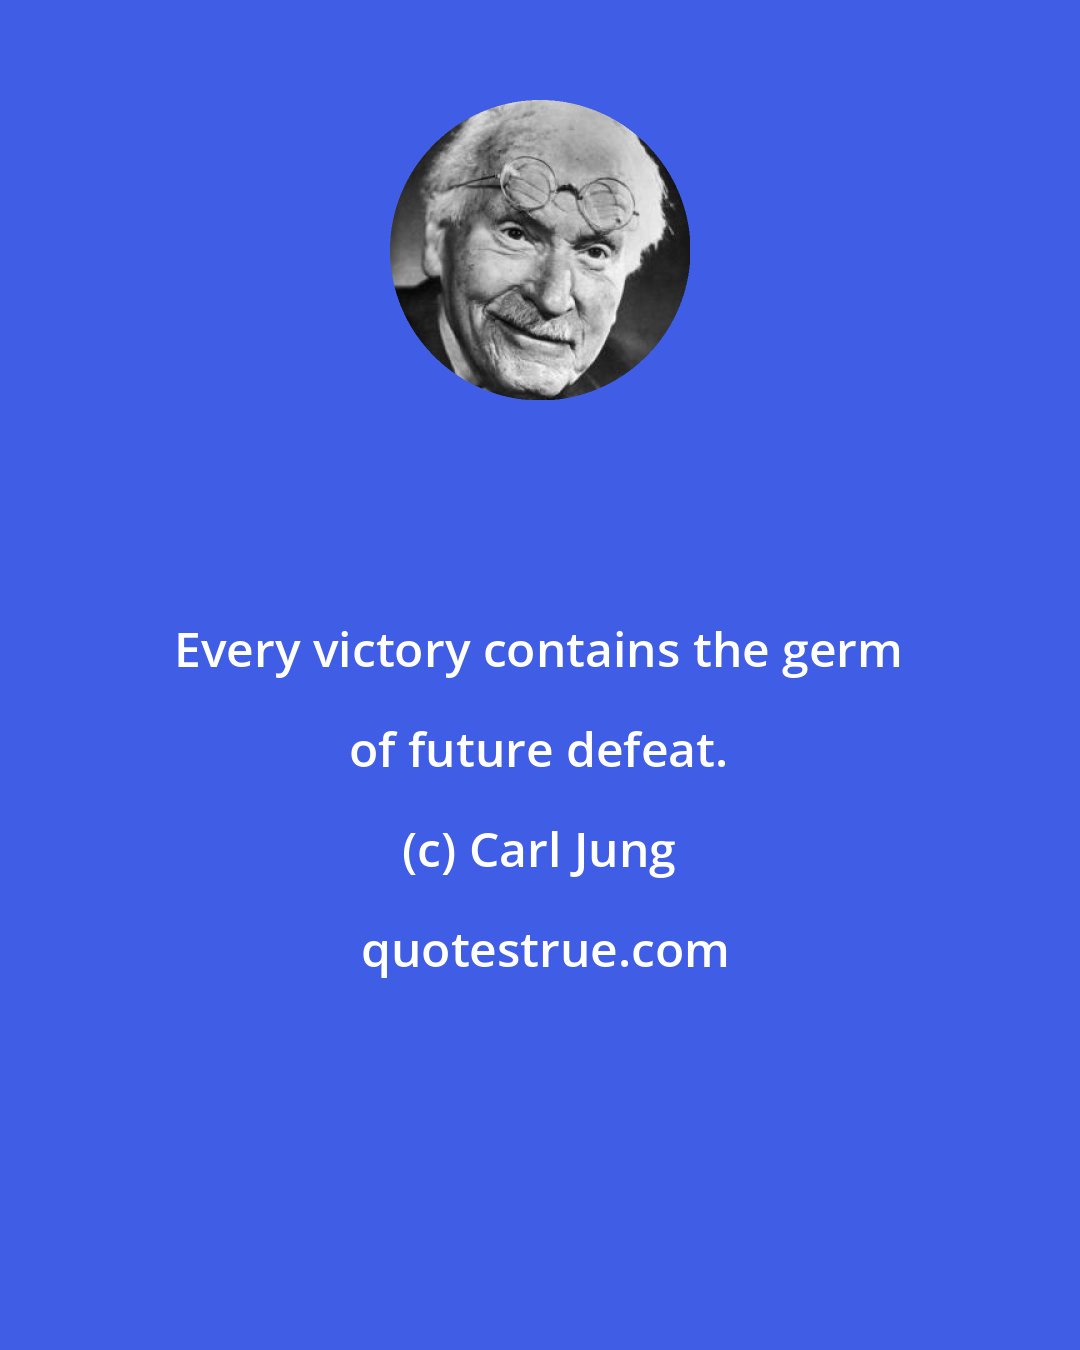 Carl Jung: Every victory contains the germ of future defeat.